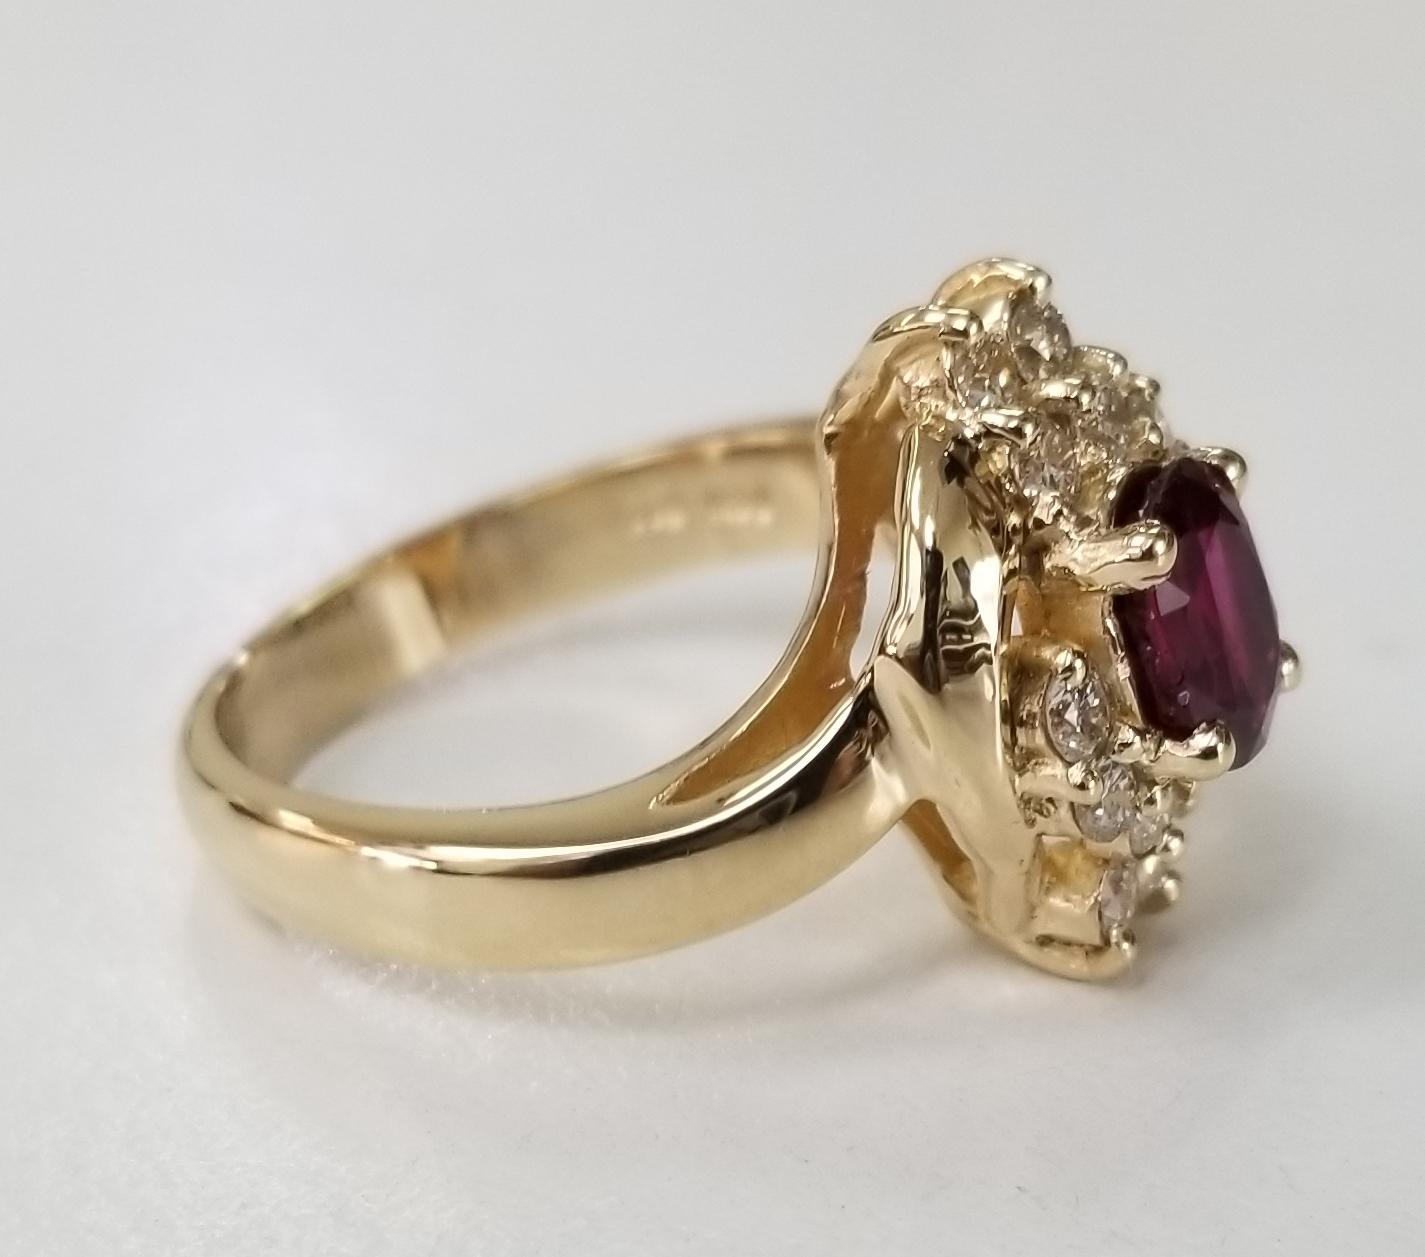 14 karat yellow gold oval Ruby diamond ring, containing 1 oval ruby of gem quality weighing 1.15cts.,surrounded with 10 round full cut diamonds of fine quality weighing .42pts.  This ring is a size 6 but we will size to fit for free.